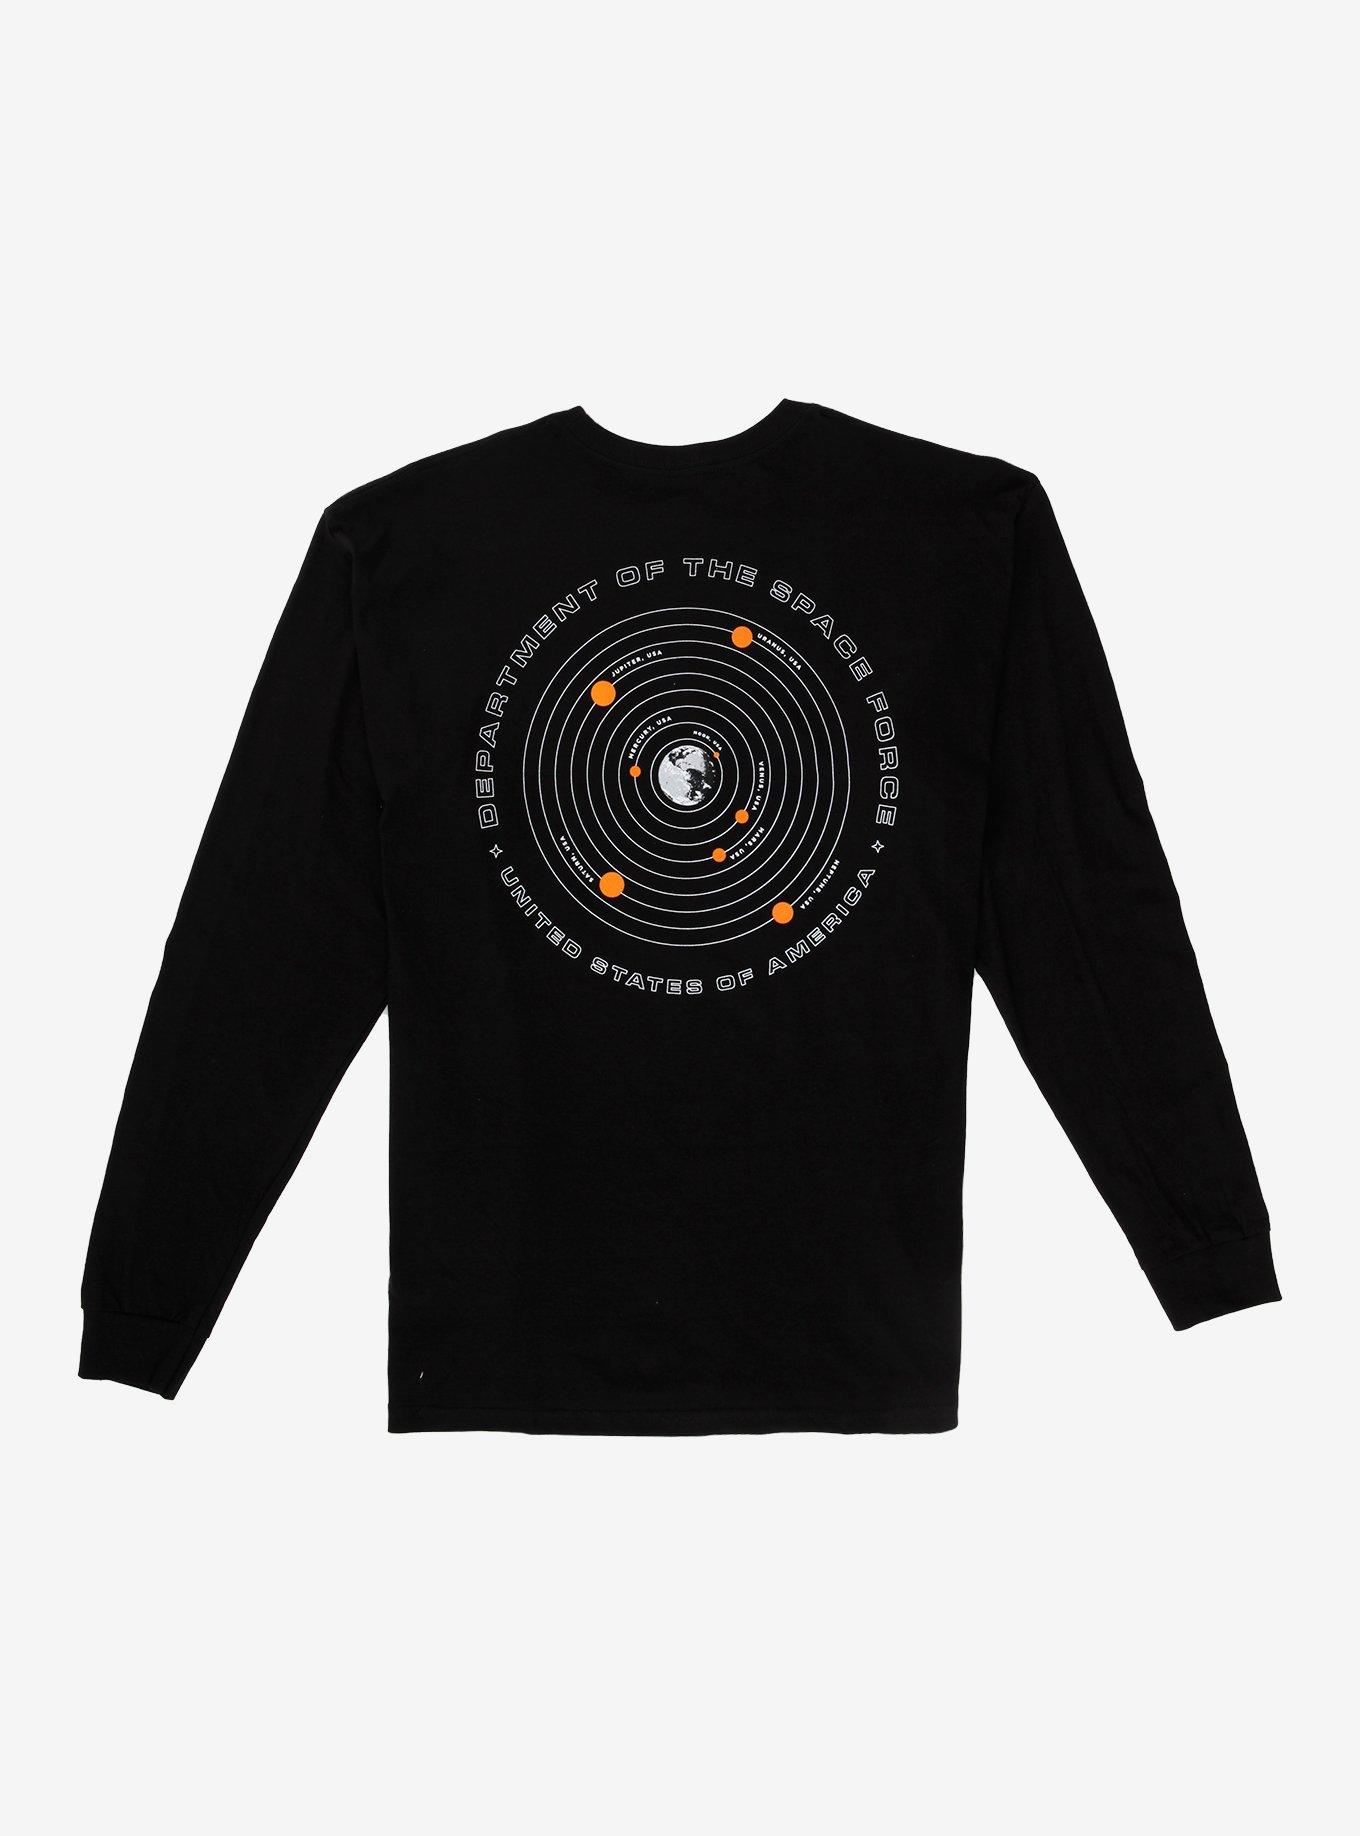 Space Force Department of the Space Force Long Sleeve T-Shirt, BLACK, hi-res